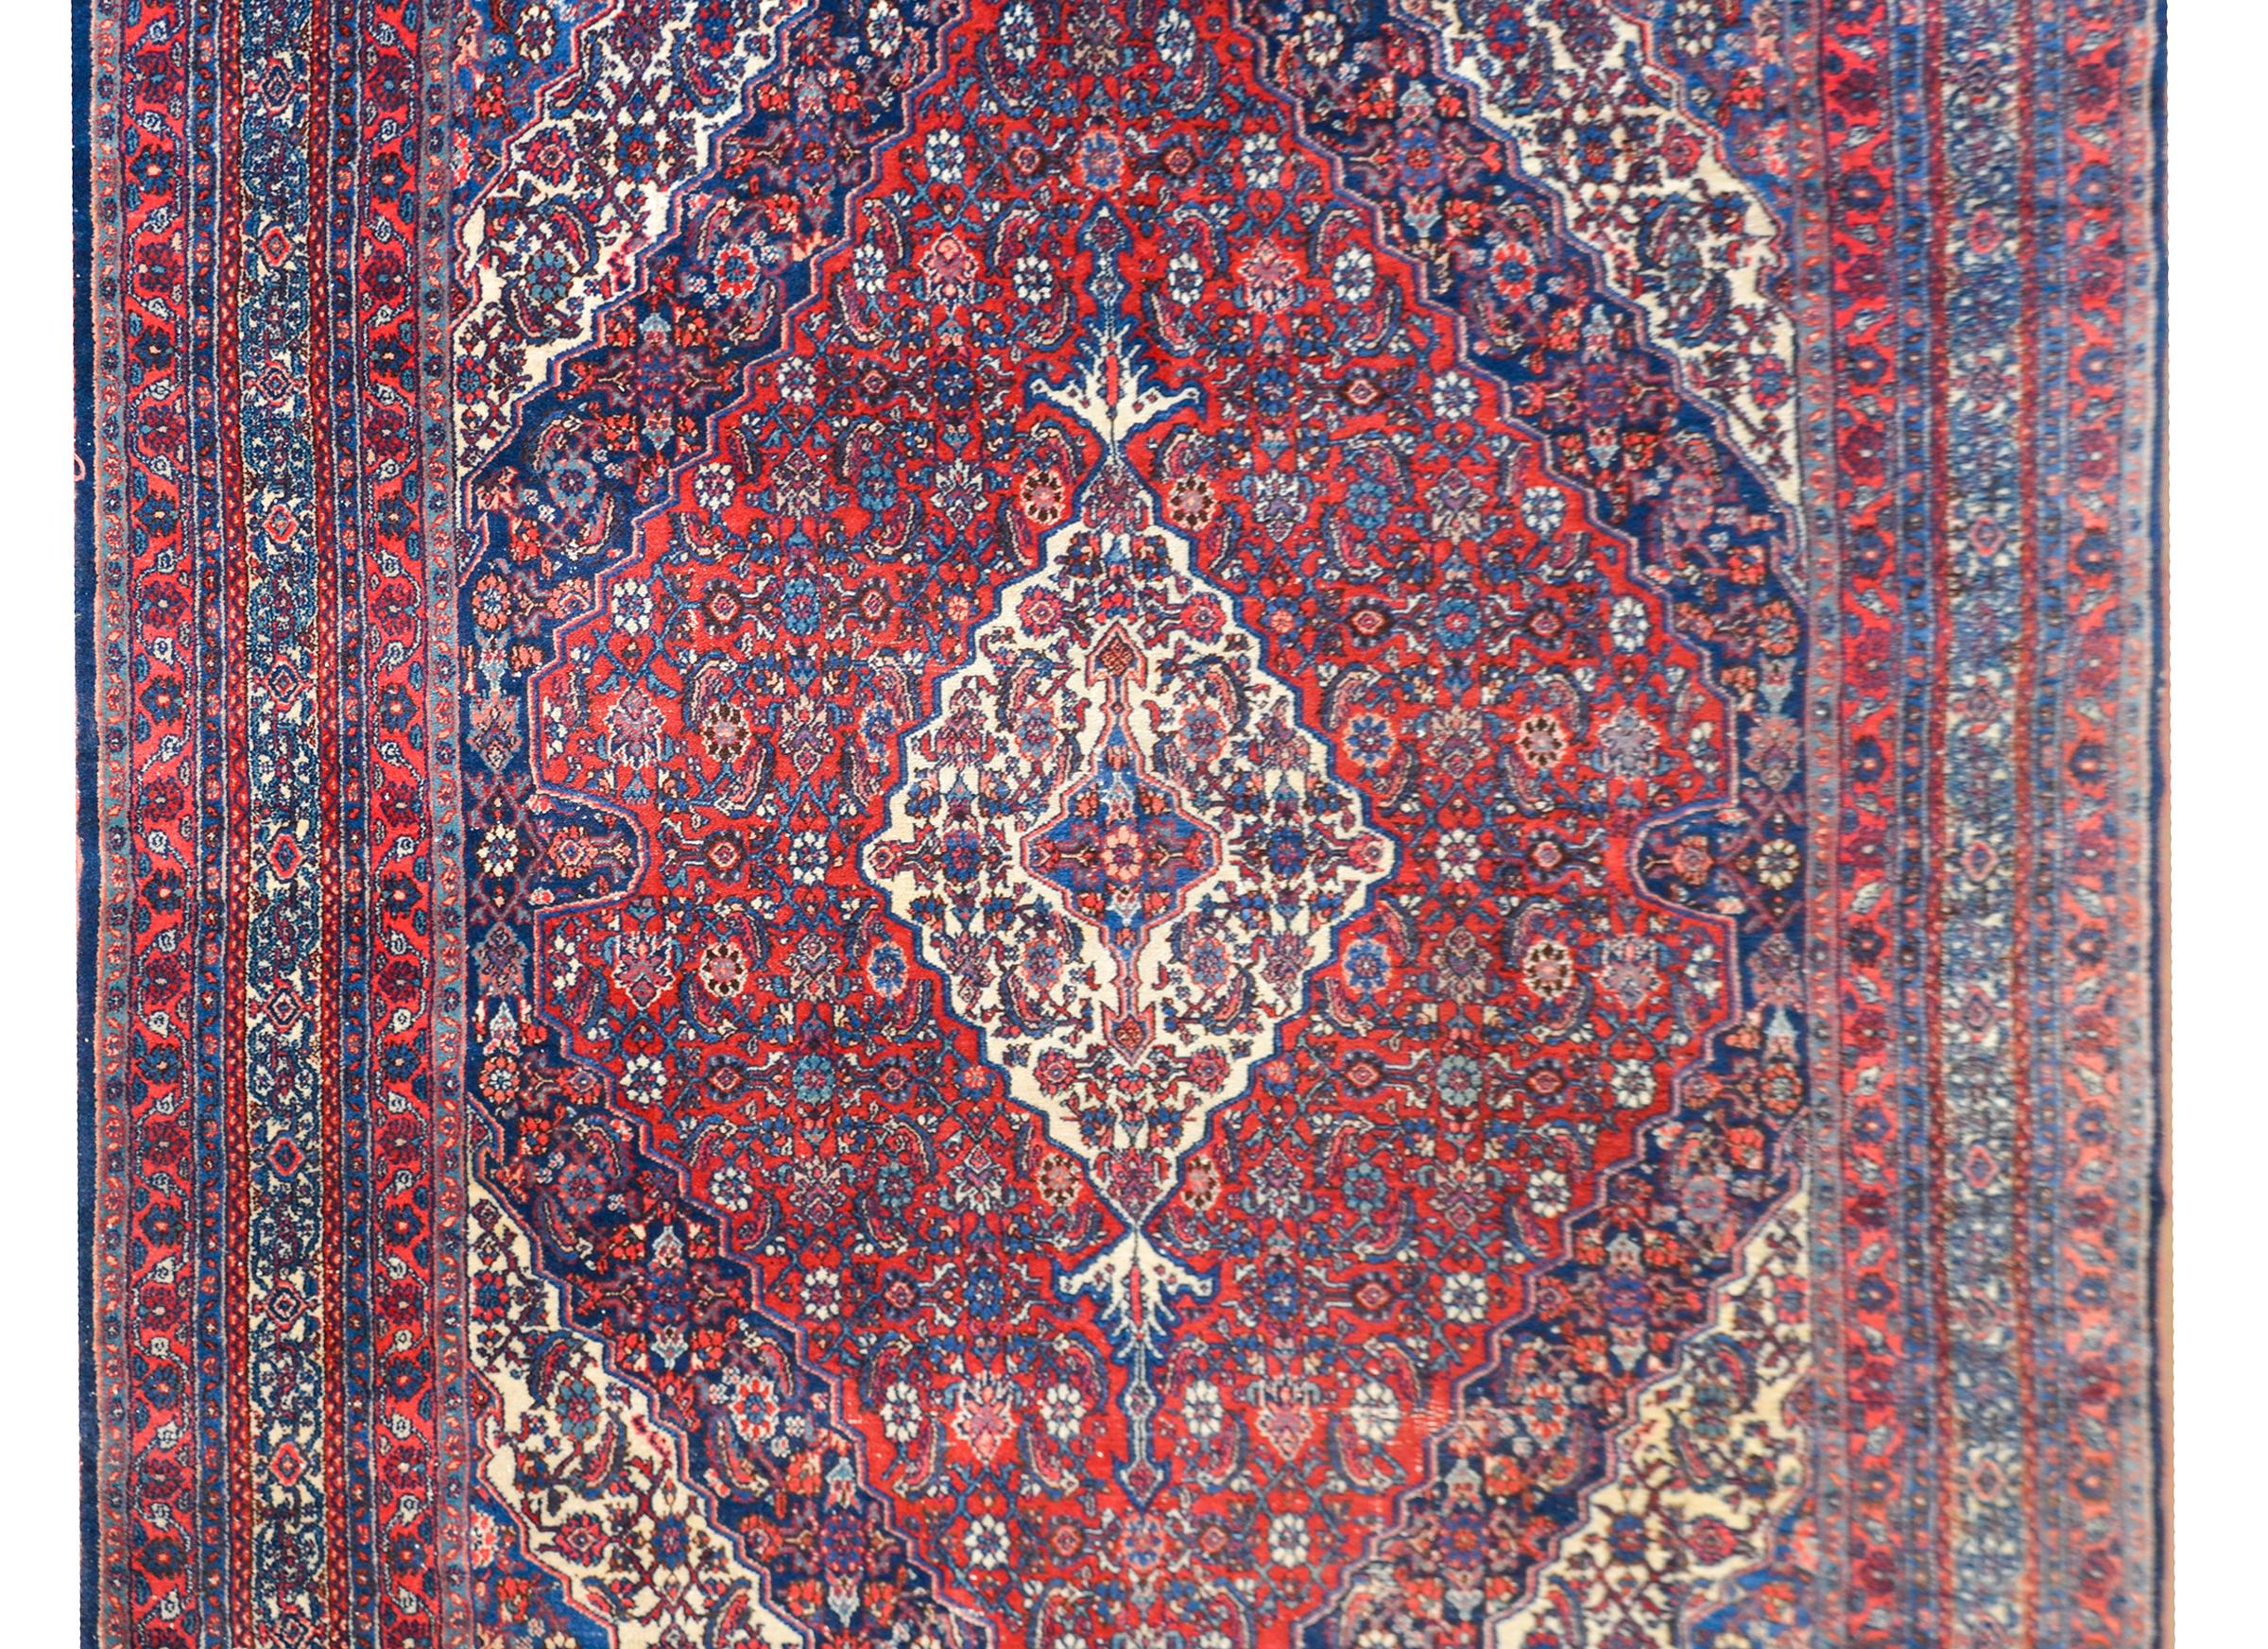 A wonderful early 20th century Persian Bibikabad rug with a diamond medallion set against a floral partnered field of flowers, and surrounded by a complex border with multiple petite floral patterned stripes.